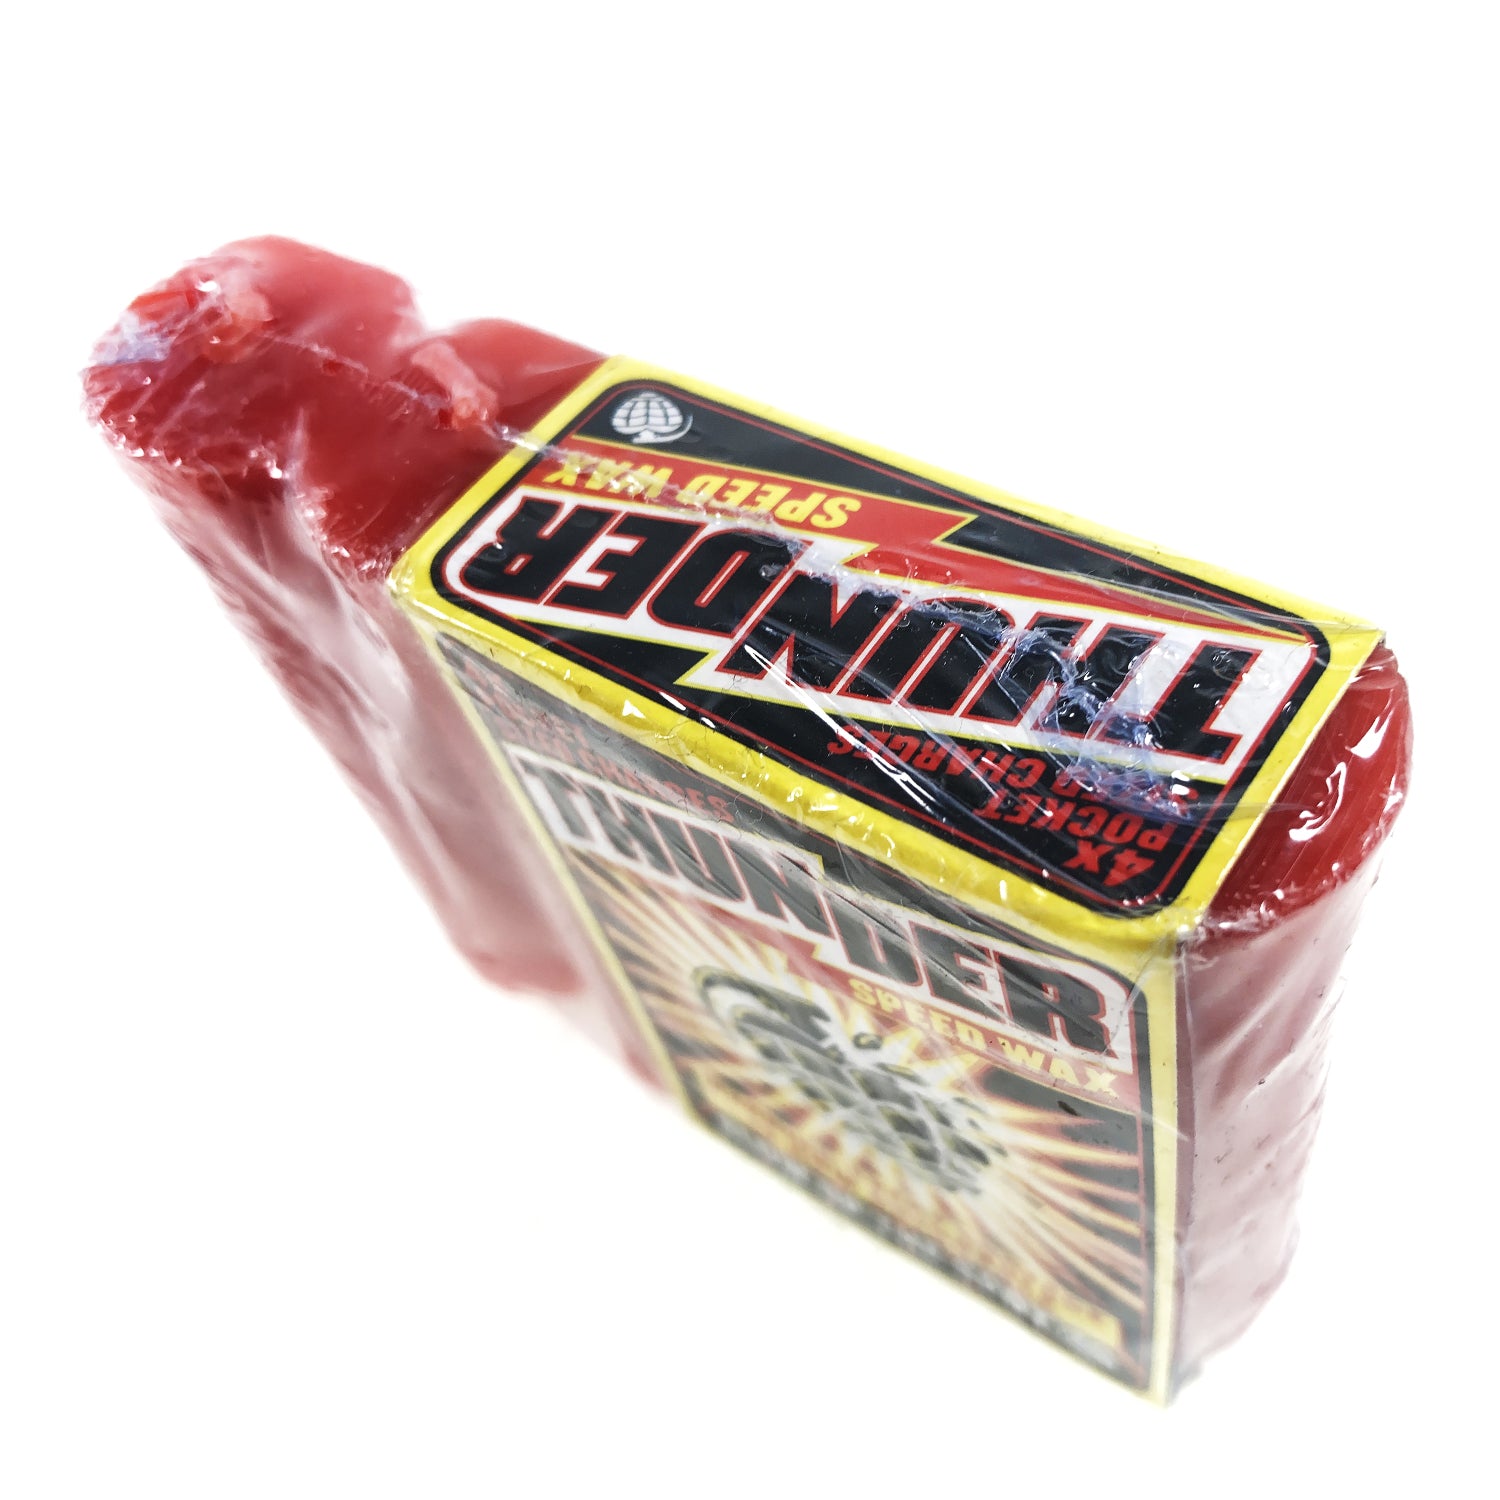 Thunder Speed Wax -  Red - Prime Delux Store